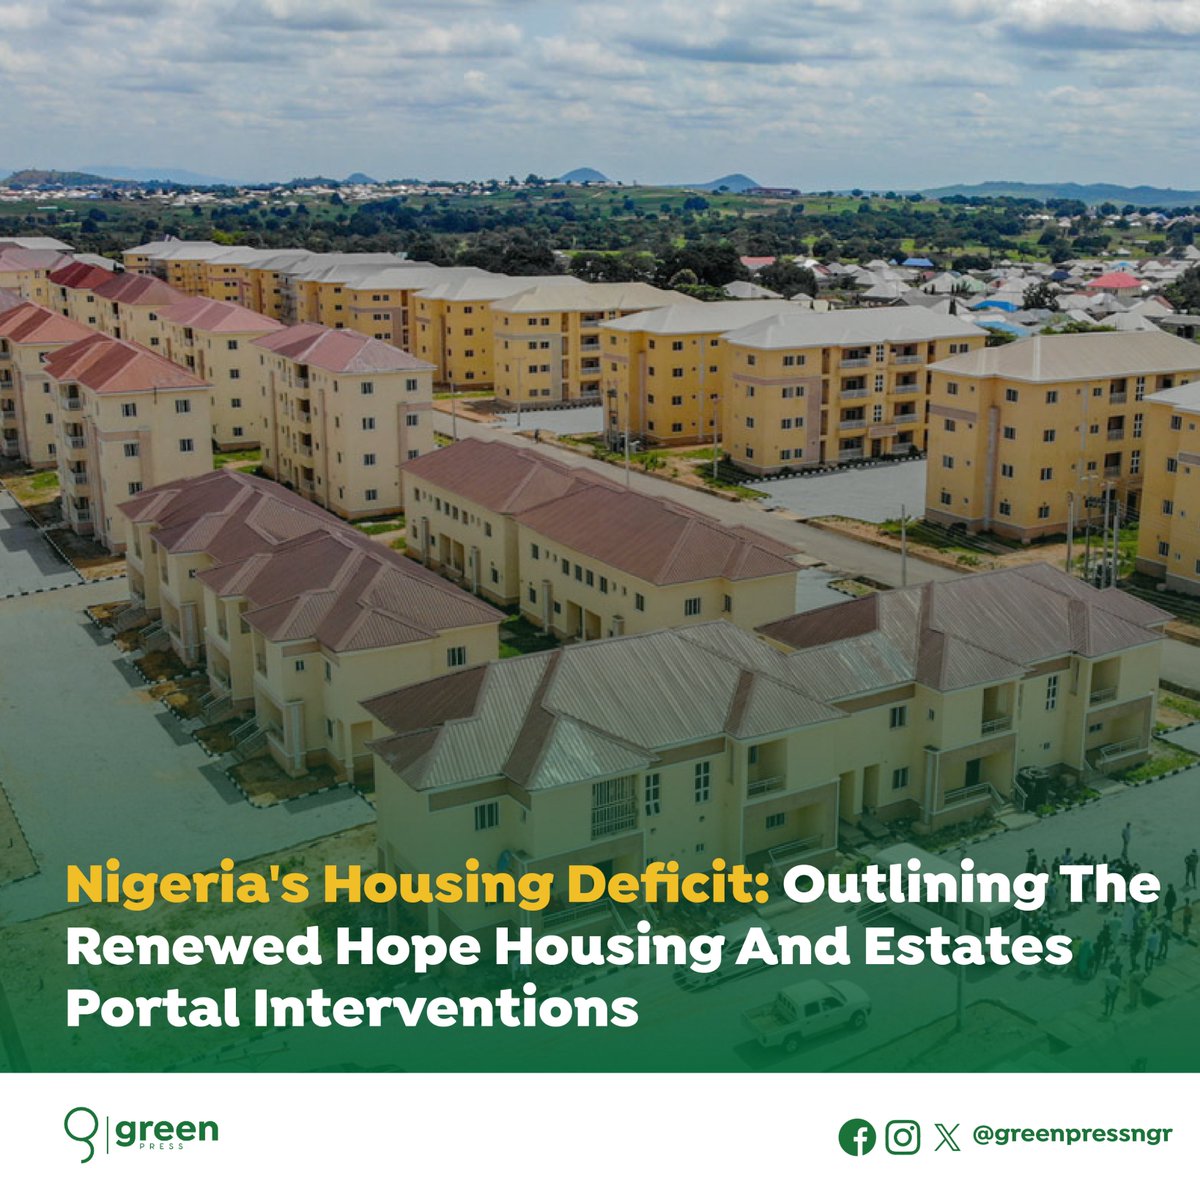 Nigeria's Housing Deficit: Outlining the Renewed Hope Housing and Estates Portal Interventions Nigeria's housing deficit has reached a critical point, with an estimated 28 million units needed to address the current shortfall. The recent discovery of makeshift apartments under